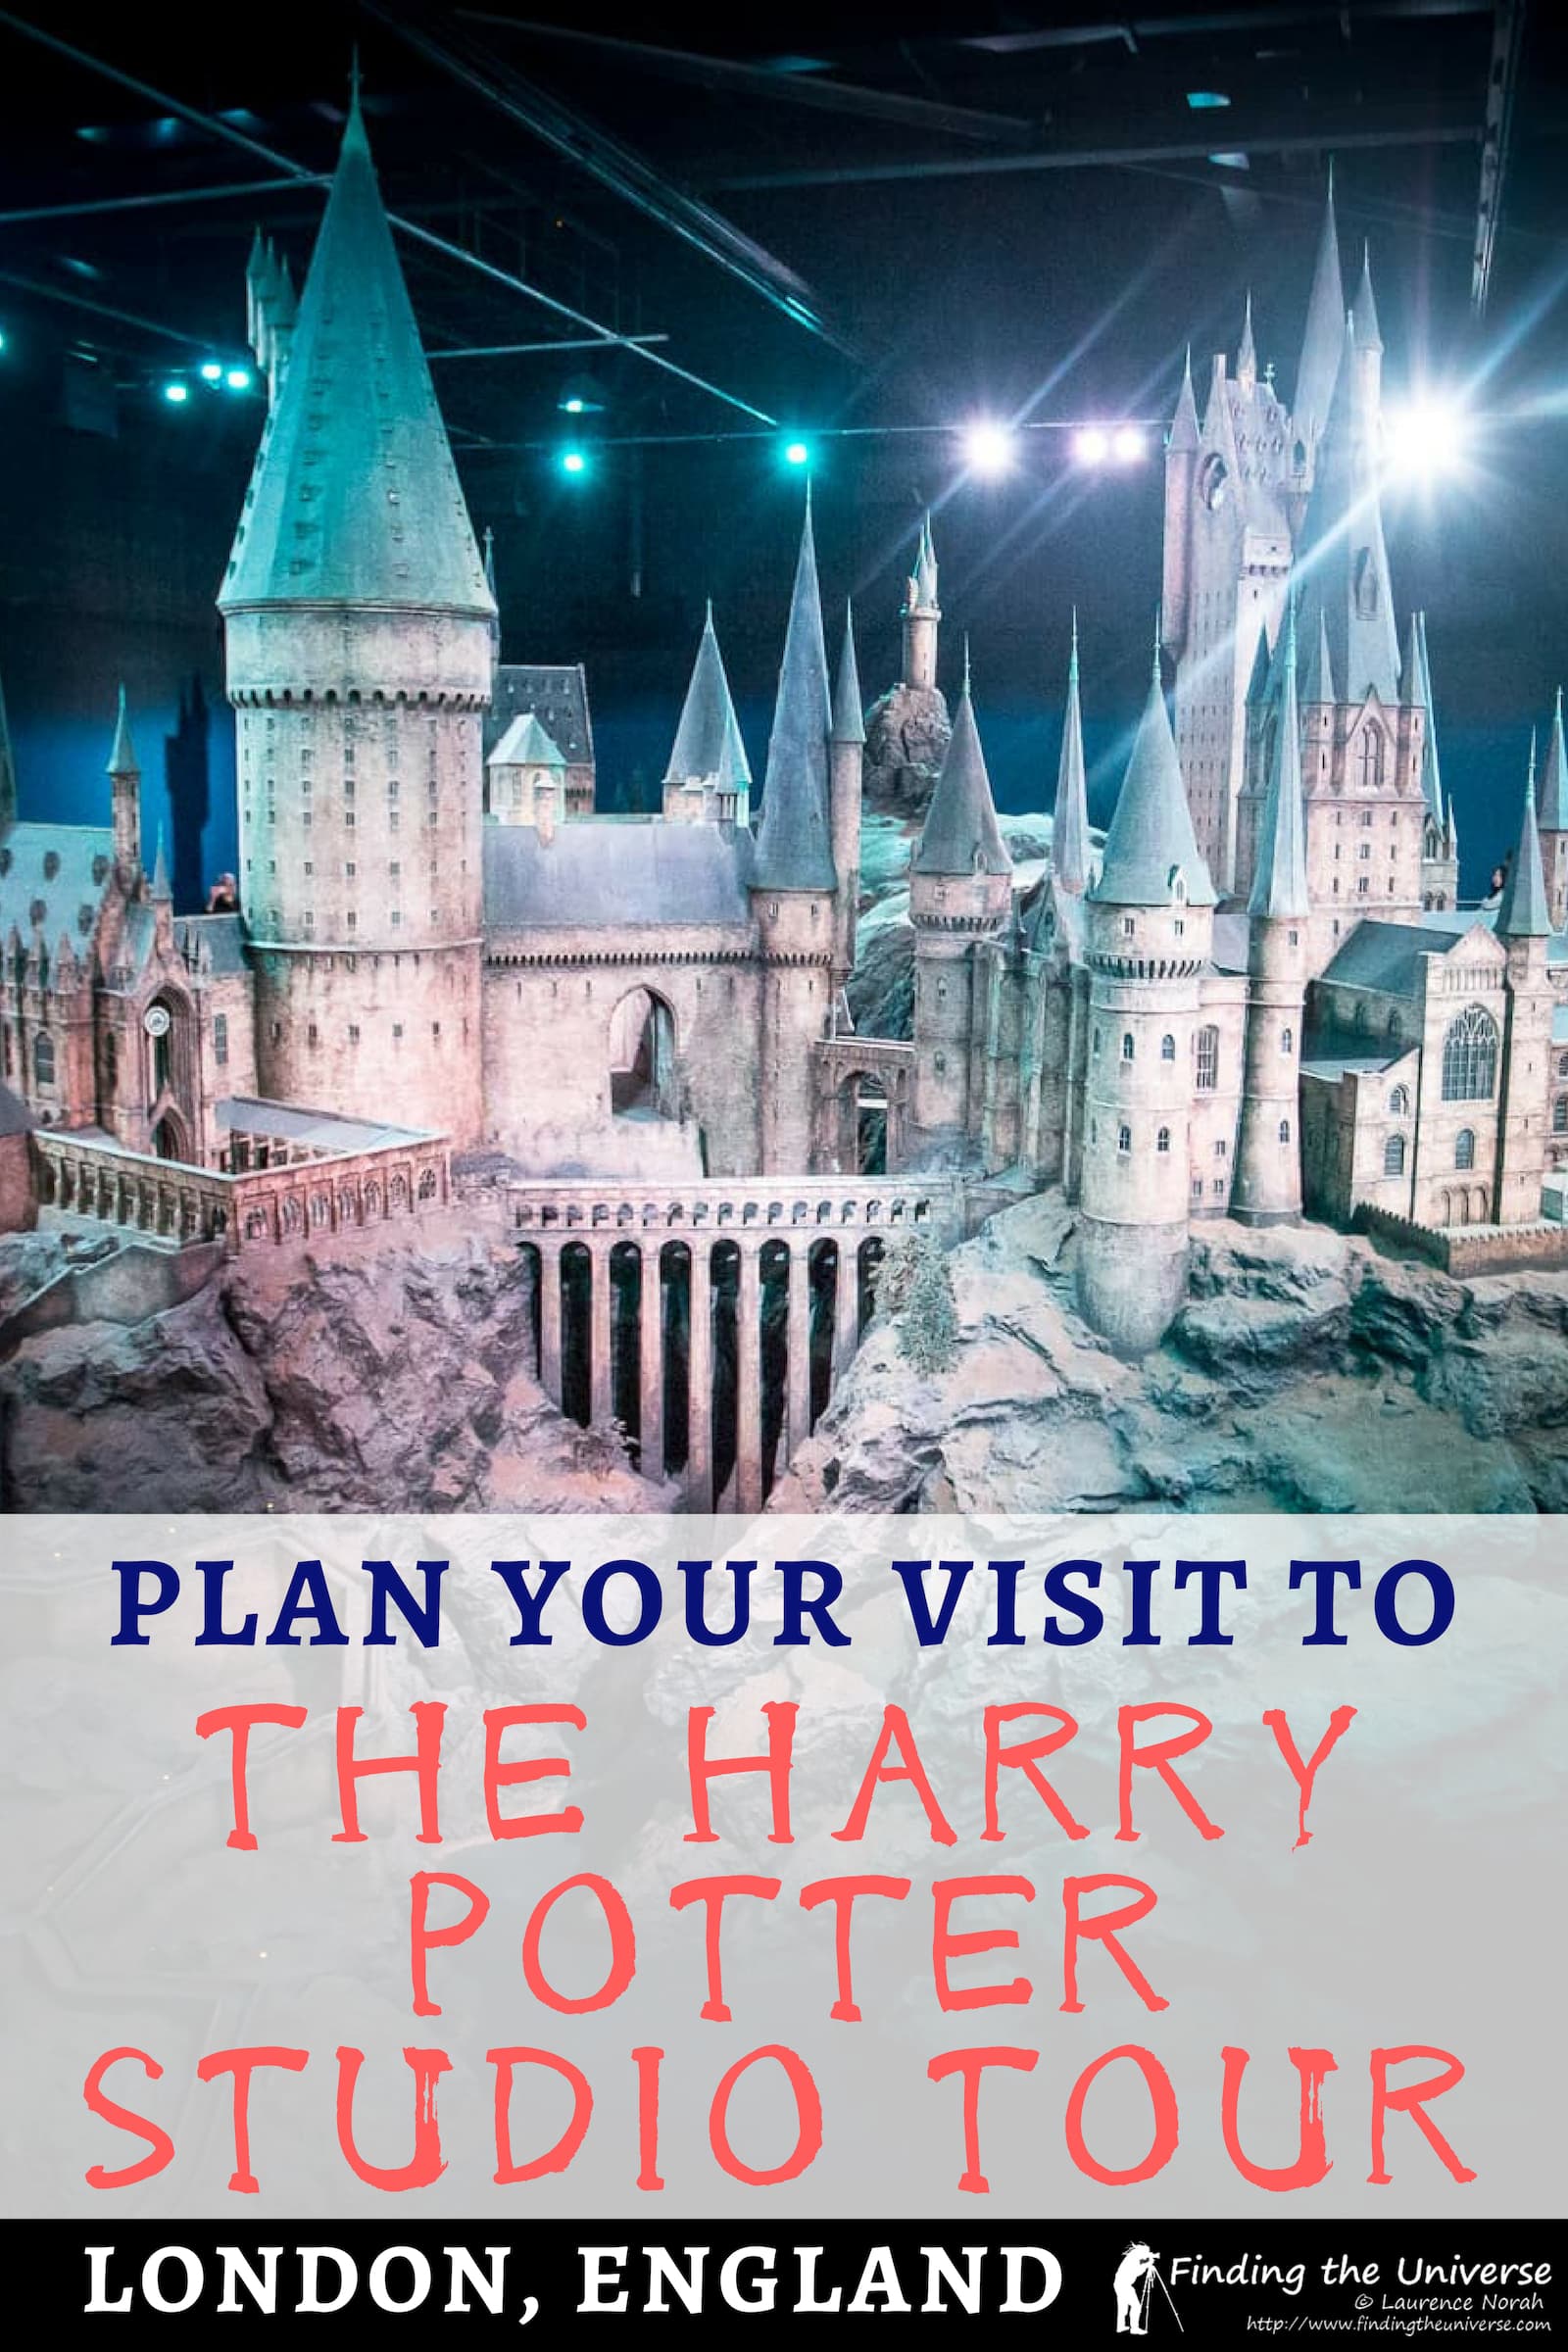 A detailed guide to taking a Harry Potter Studio tour, including how to get tickets, how to get to the Harry Potter studios from London, tour options, and tips!